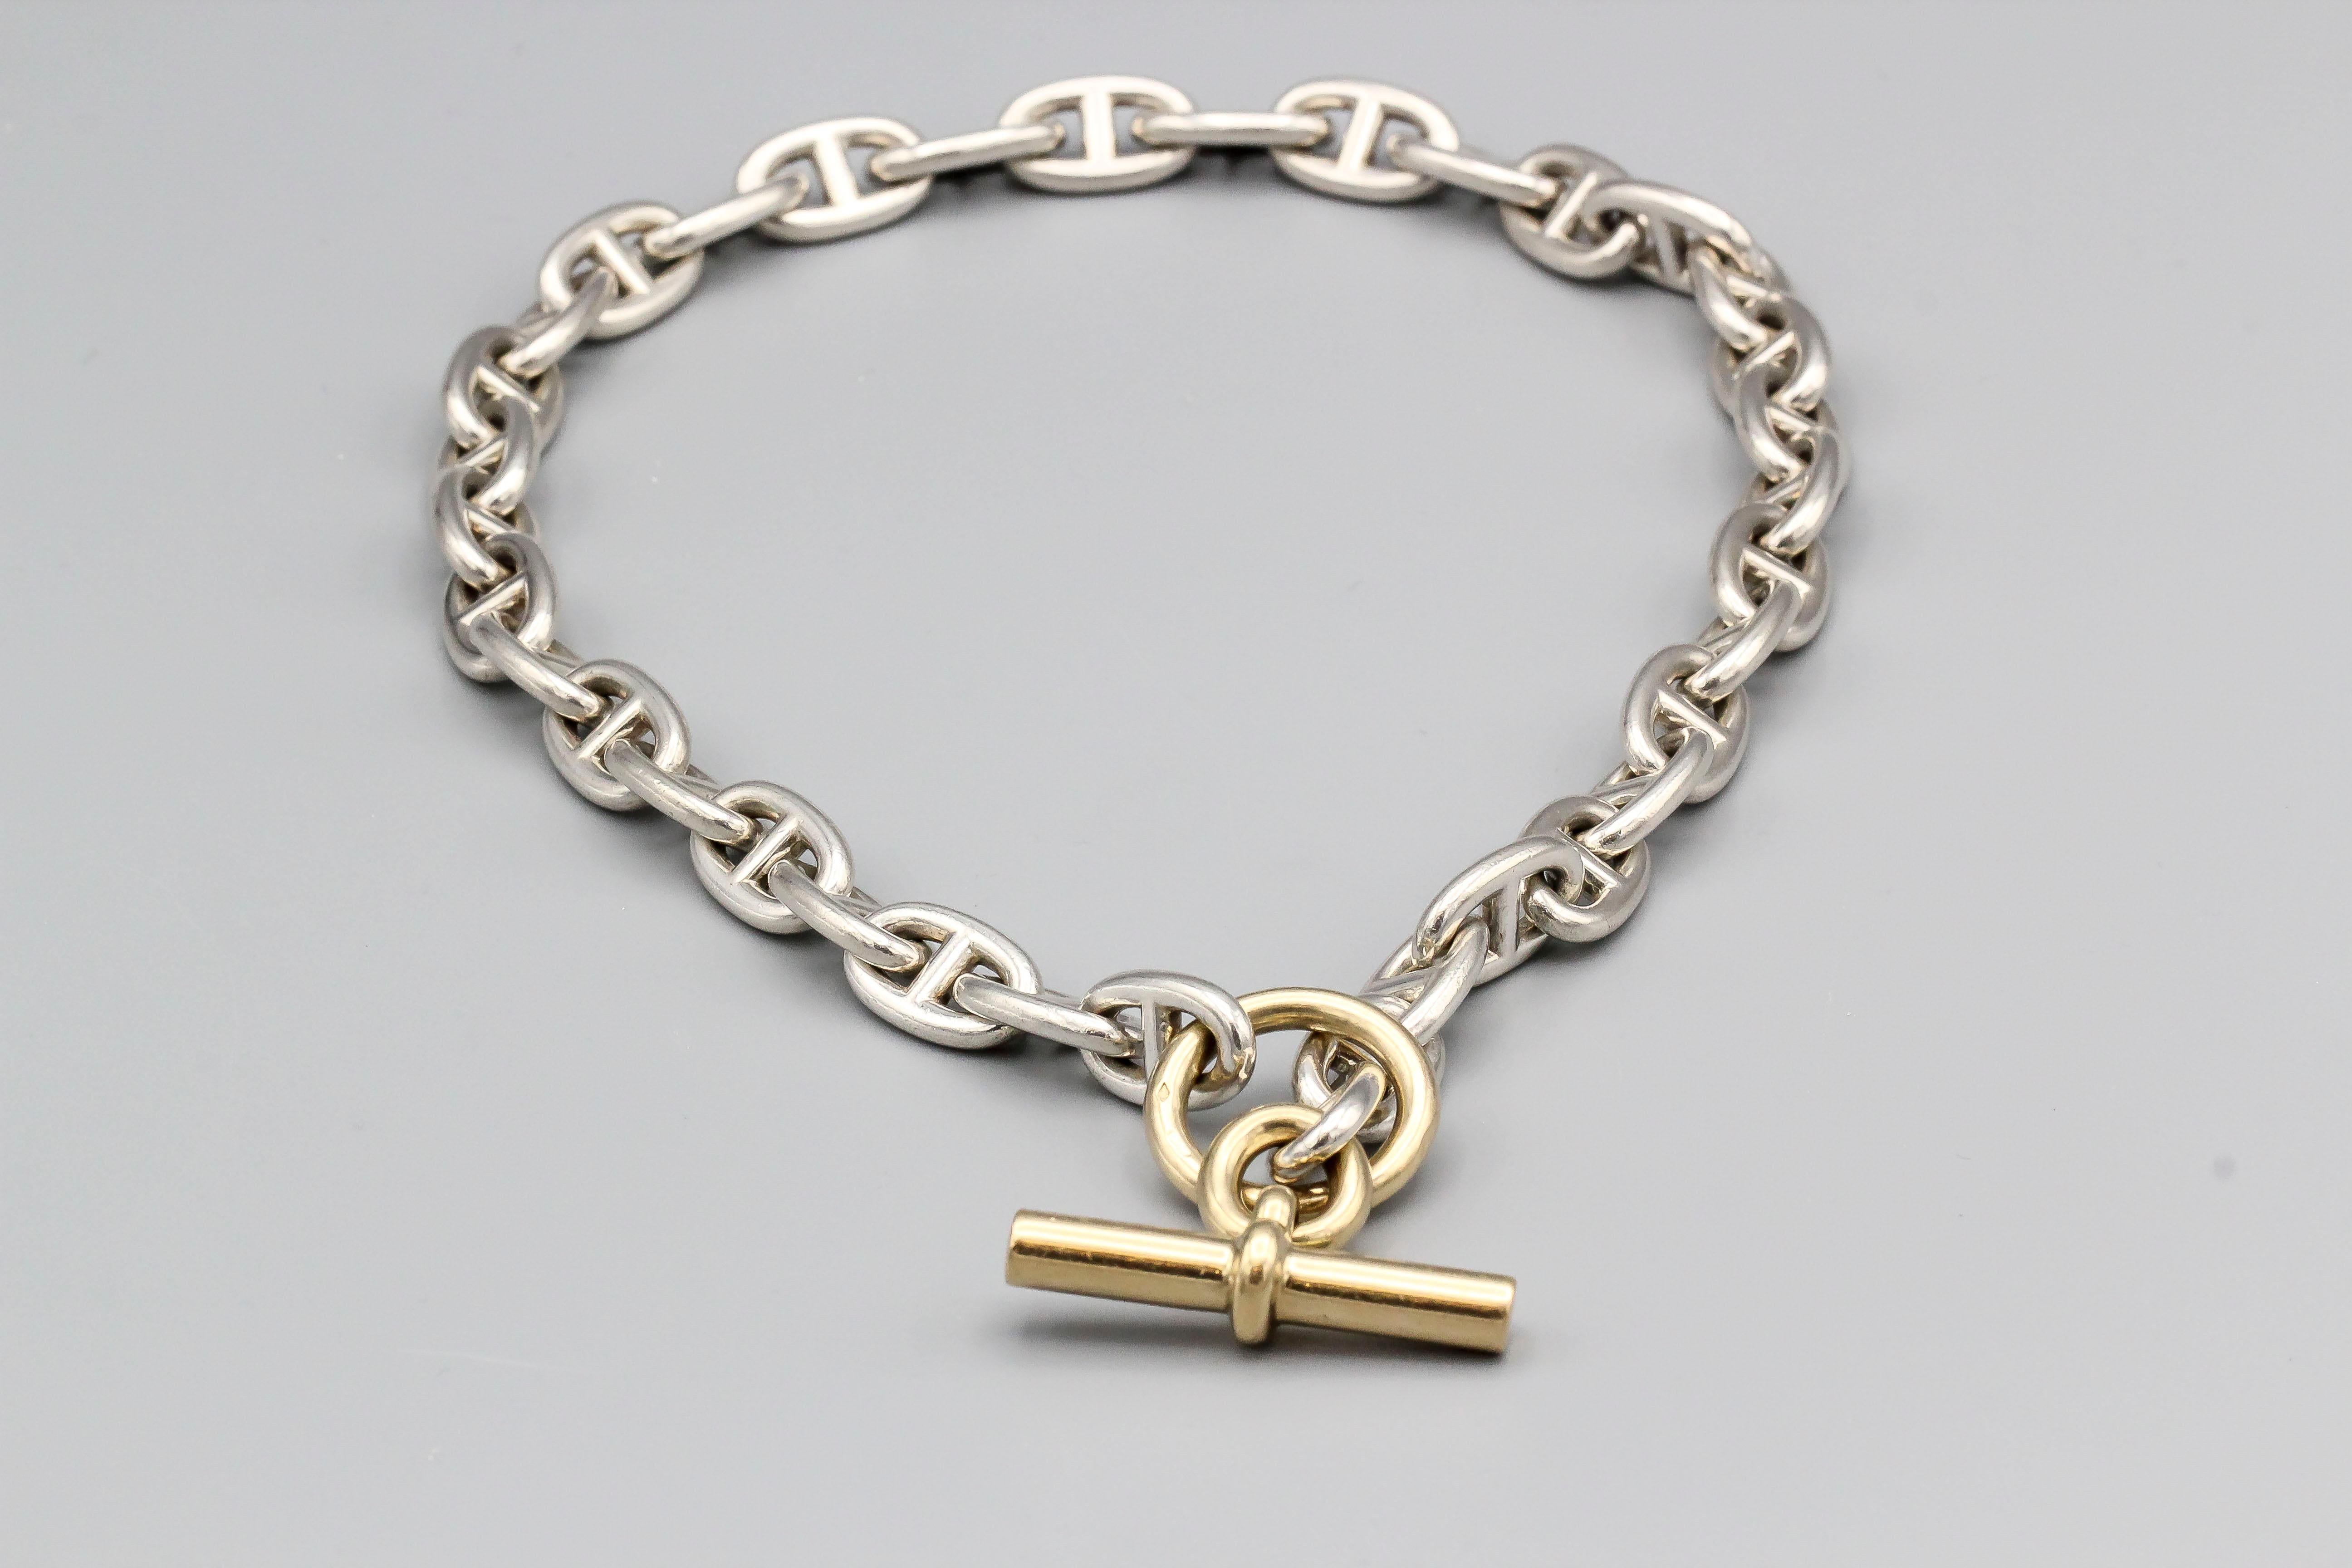 Stylish 18K gold and sterling silver toggle link necklace , from the Chaine D'Ancre collection by Hermes.  It is the large size and features an 18k gold toggle with sterling silver links.

Hallmarks: Hermes, French 18k gold assay mark, maker's mark.